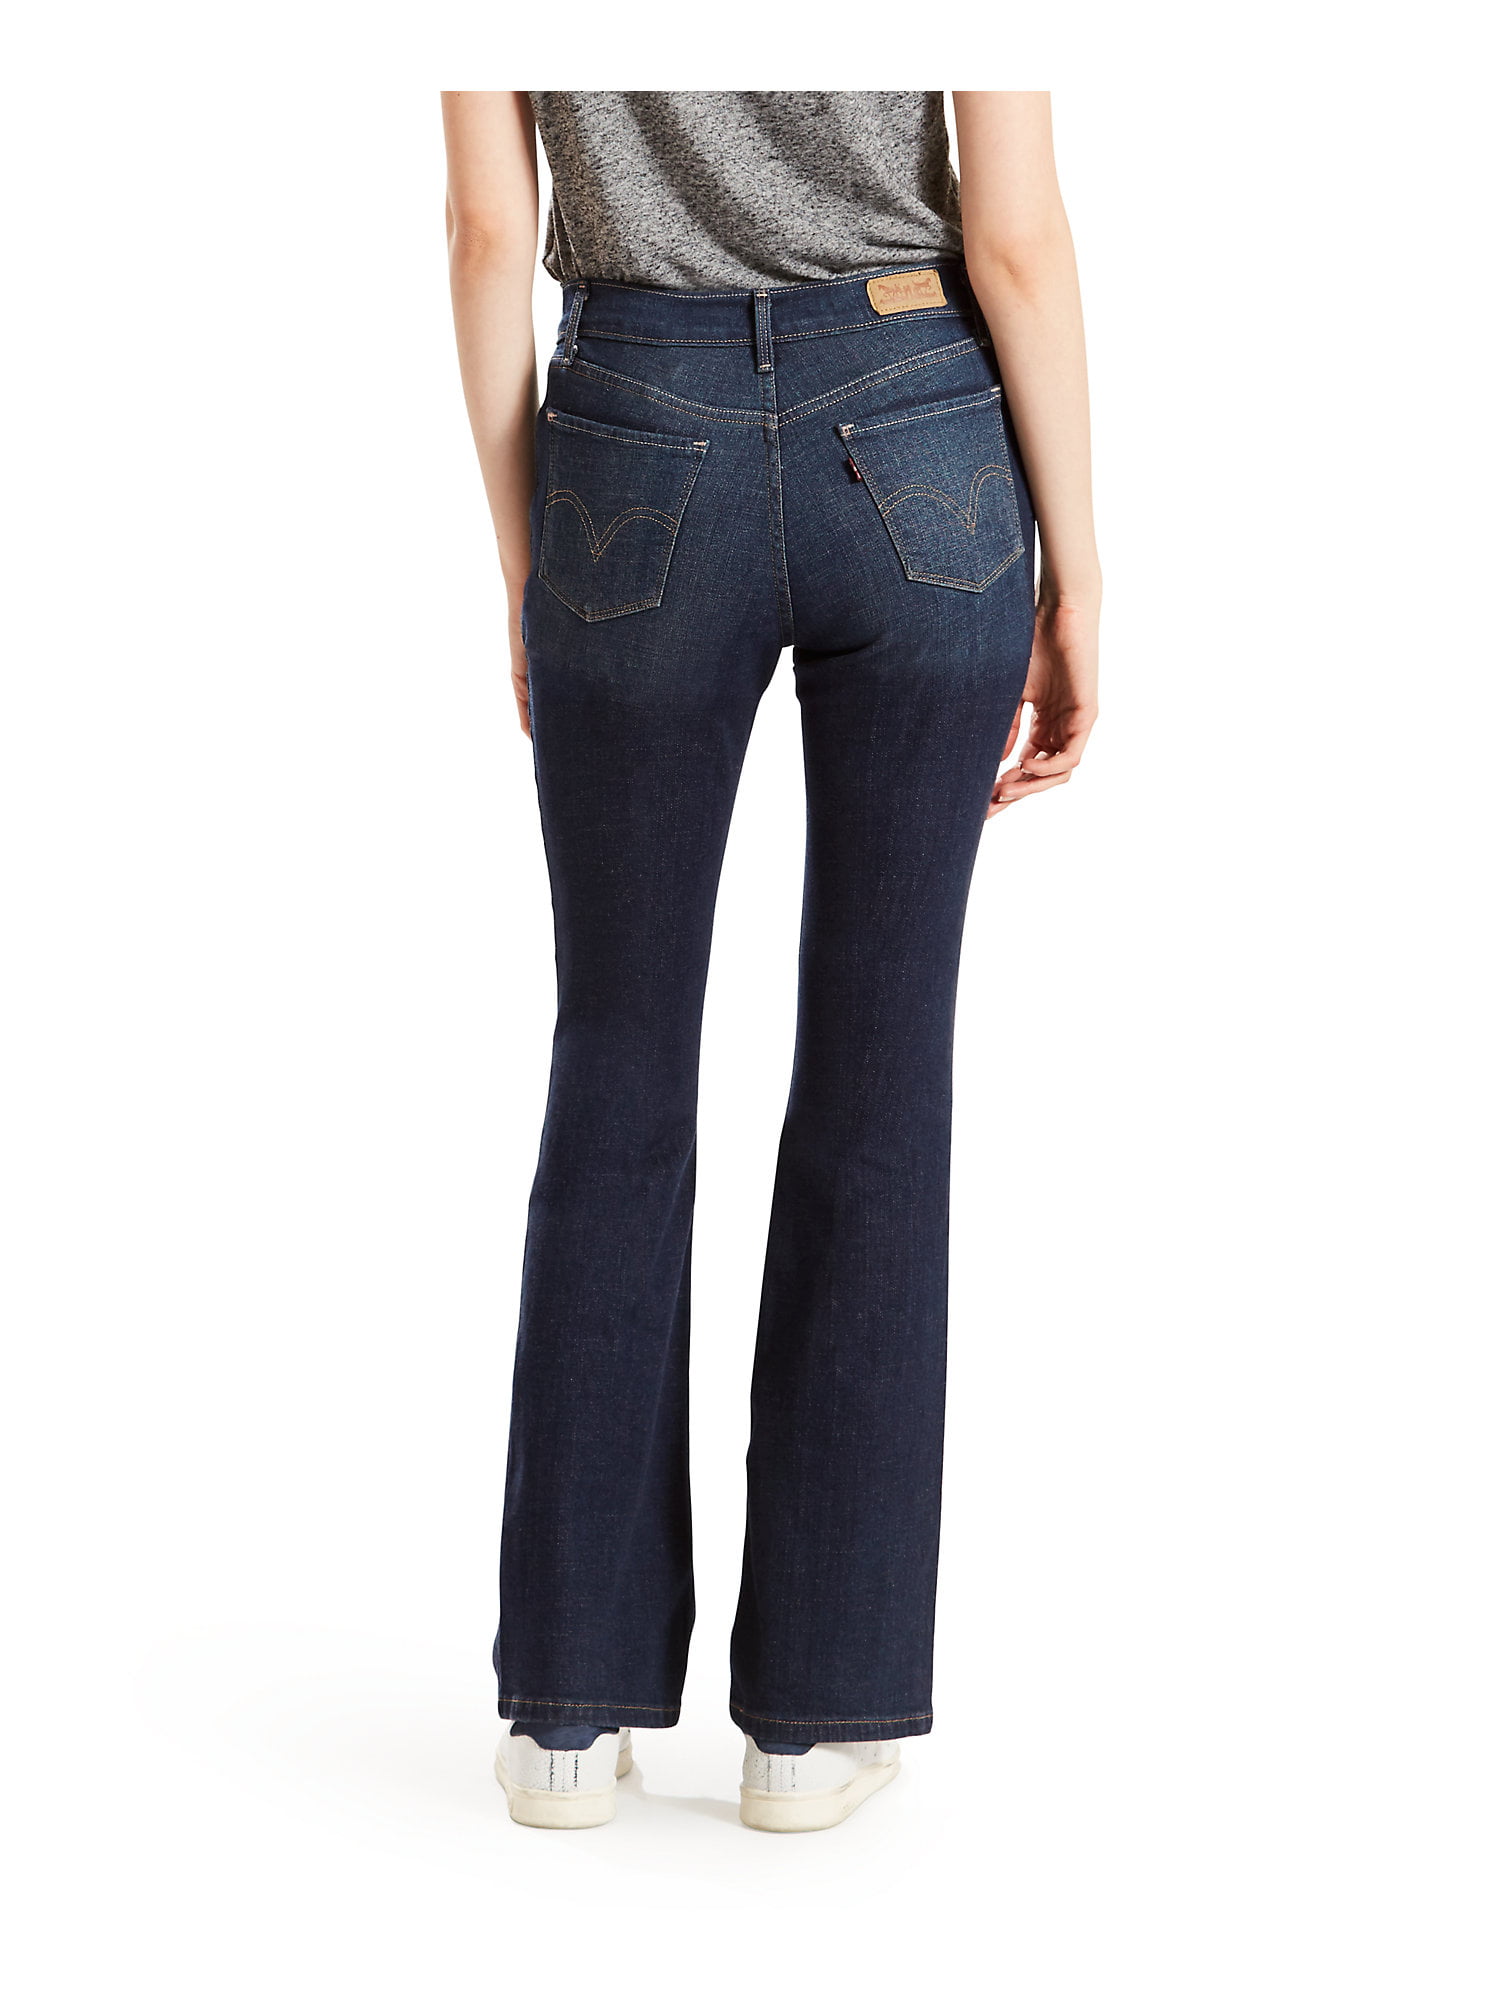 Levi 515 Bootcut Jeans For Women Outlet, SAVE 49% 